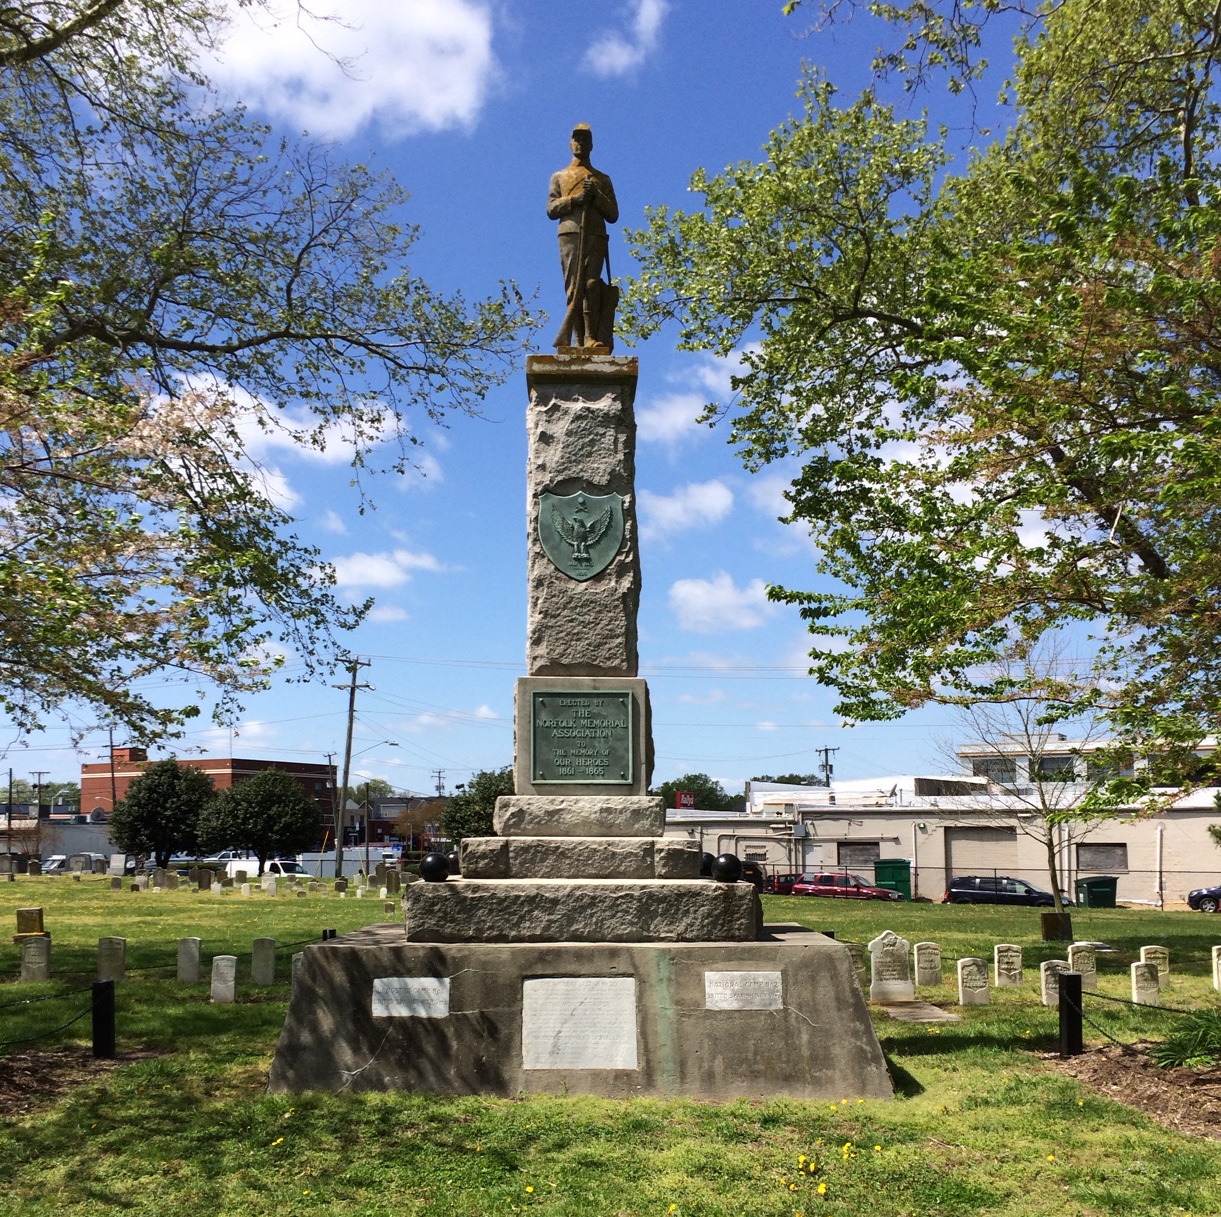 Civil War Union Soldier Monument, West Point Cemetery, completed in 1920 (<a href="https://www.visitnorfolk.com/listings/west-point-monument-at-west-point-cemetery/33/">Visit Norfolk</a>)